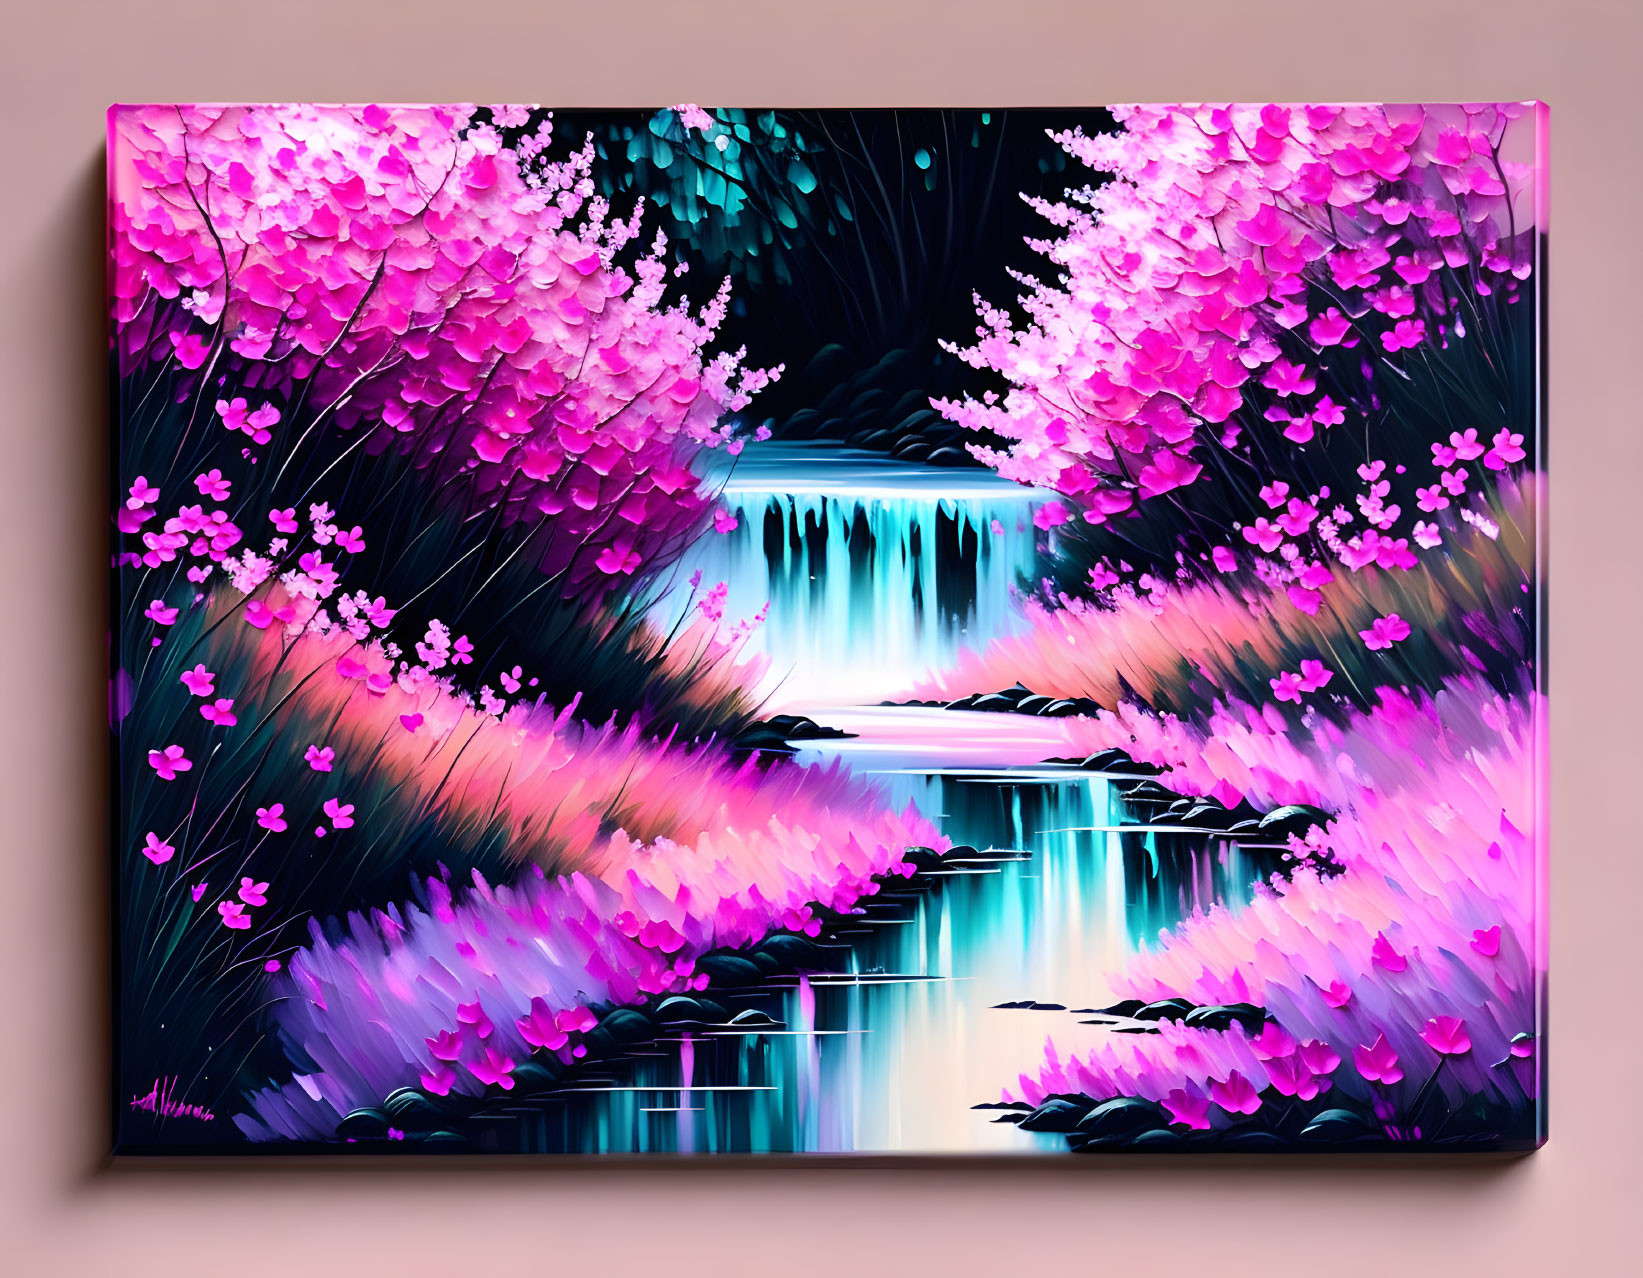 Colorful painting of mystical waterfall with pink cherry blossoms, purple foliage, and blue waters under enchanted